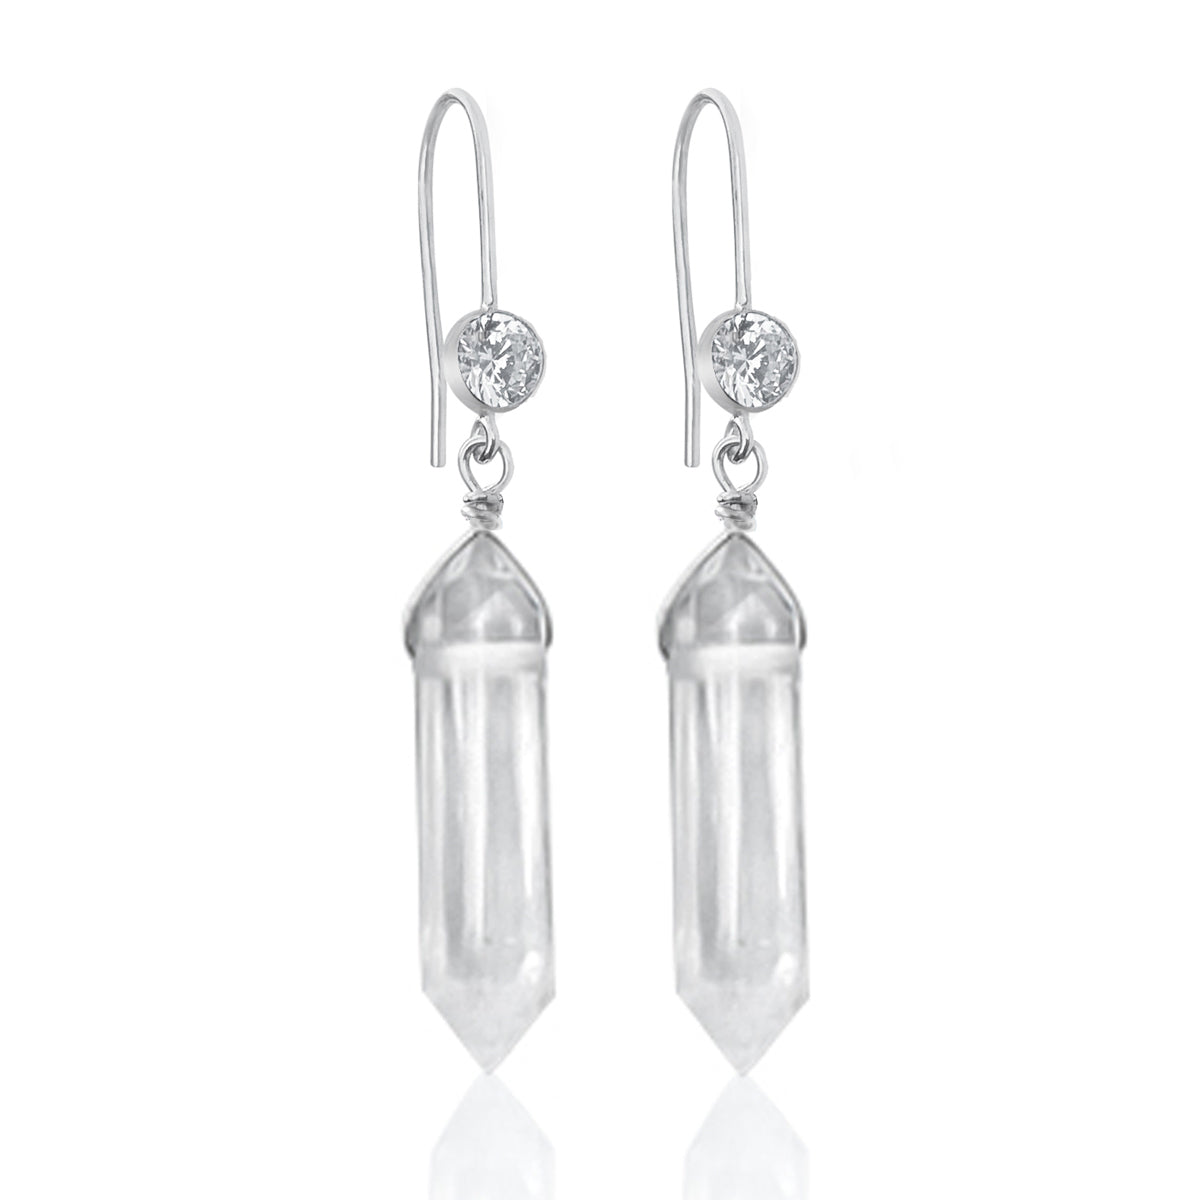 The Intuition Infusion Crystal Earrings are a perfect accessory for yogis and mindfulness-oriented individuals who seek to enhance their spiritual practices and connect with their higher selves.